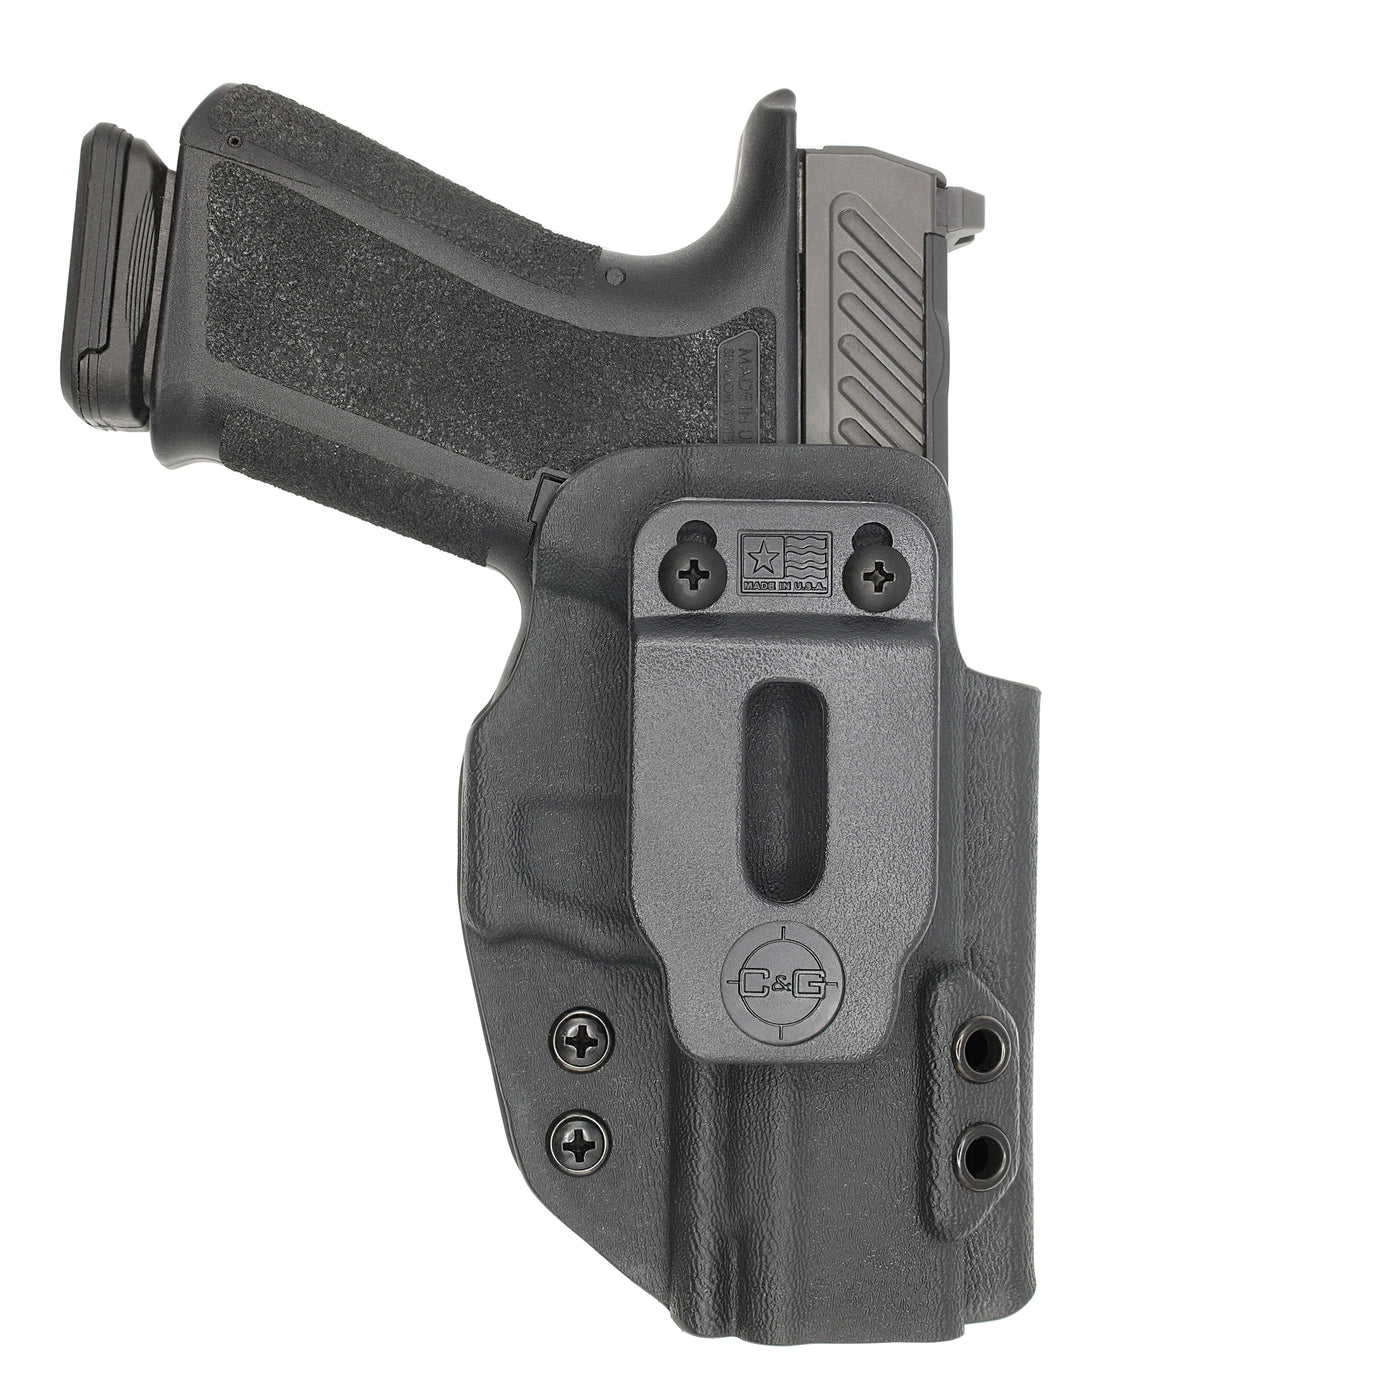 C&G Holsters Custom IWB Covert Shadow Systems MR920 holstered